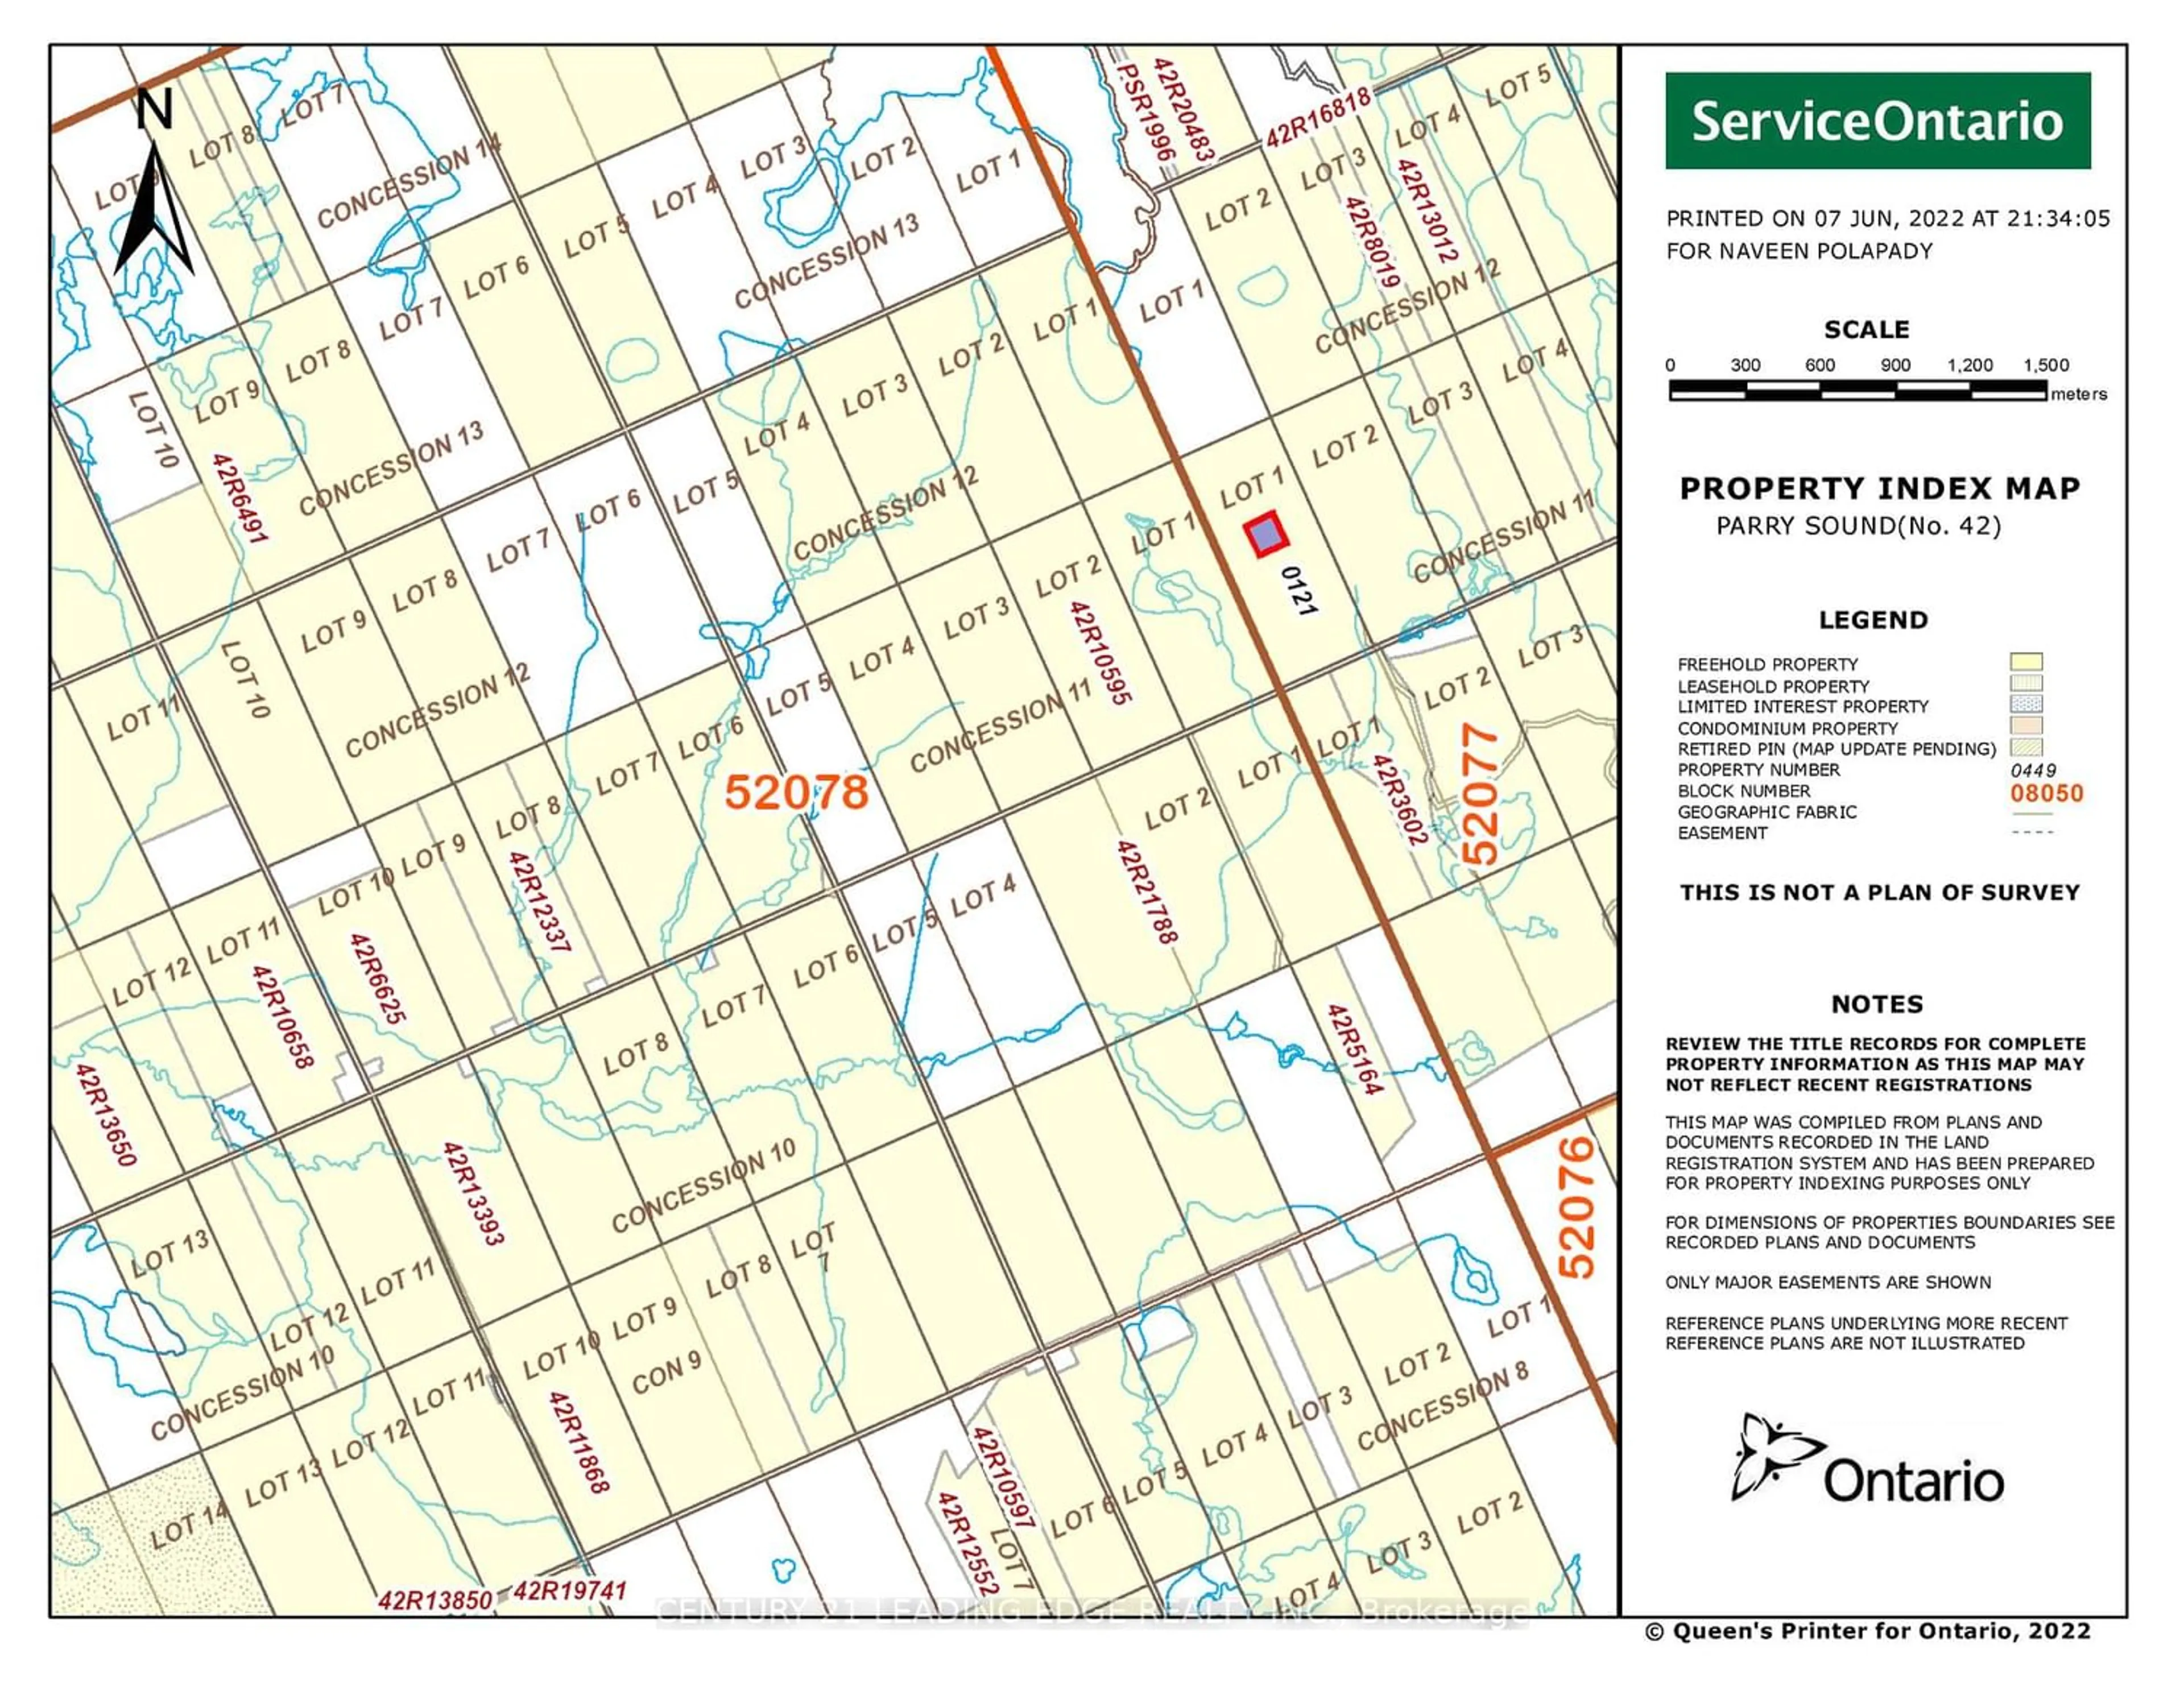 Picture of a map for 0 79.504452 Rd Rd, Strong Ontario L1S 7S2